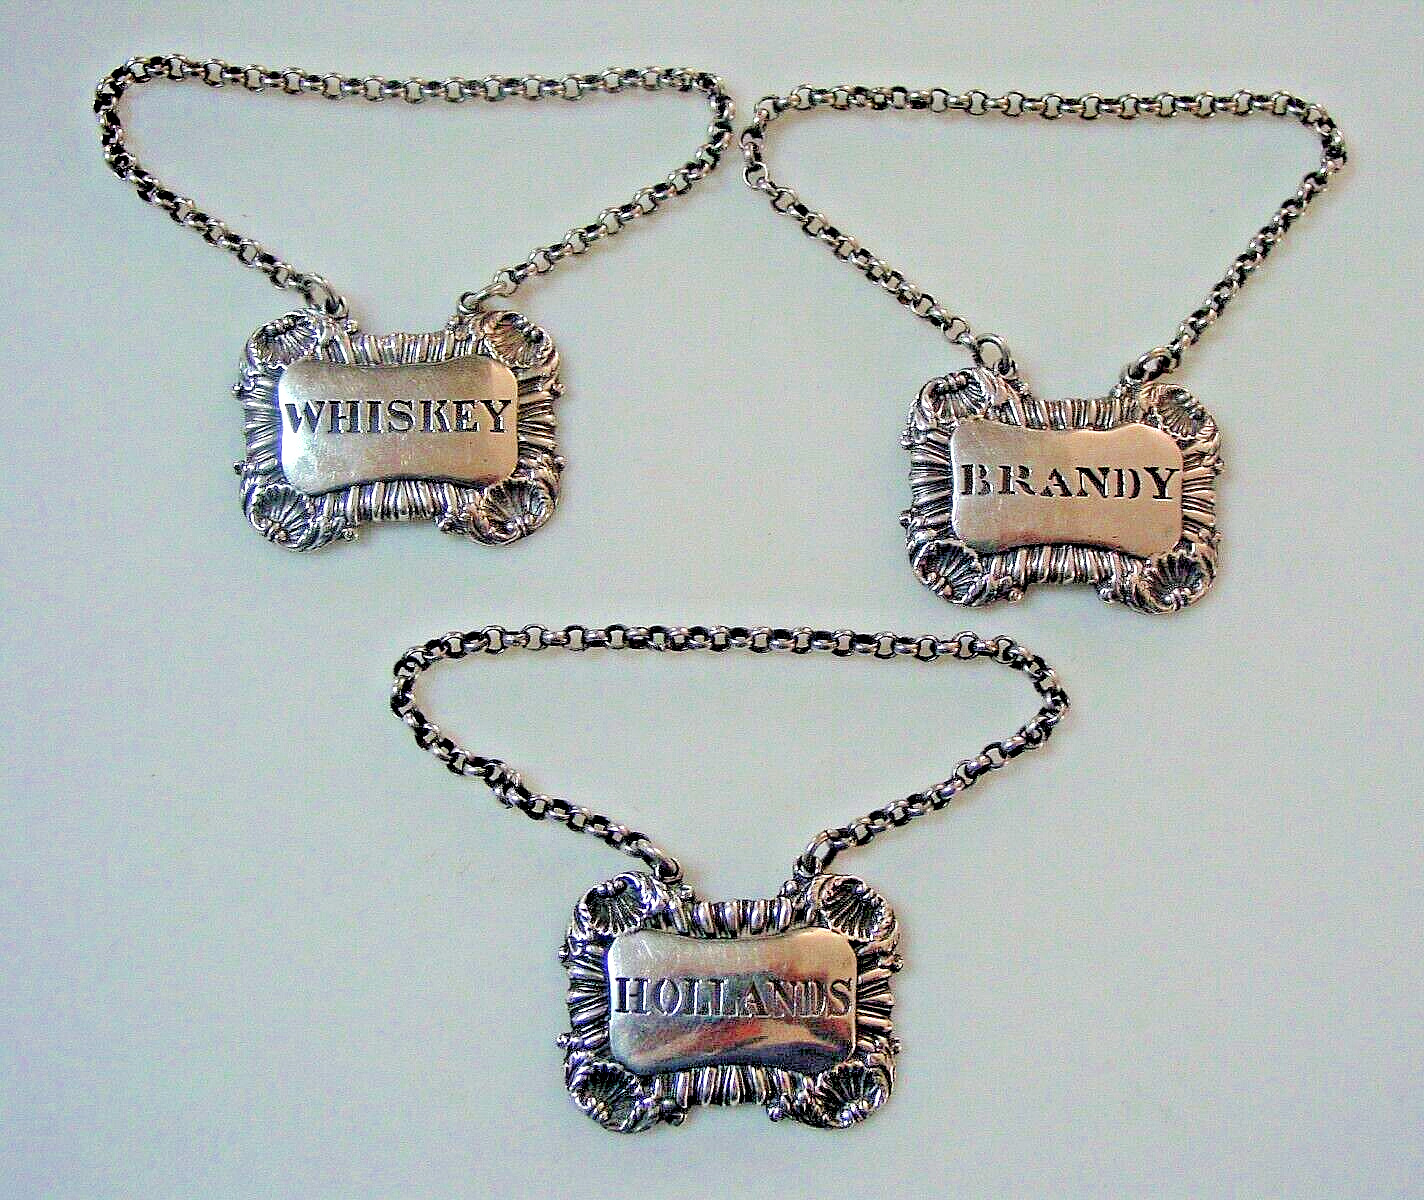 Fine quality, hefty sterling silver decanter labels HOLLANDS, WHISKEY, BRANDY.